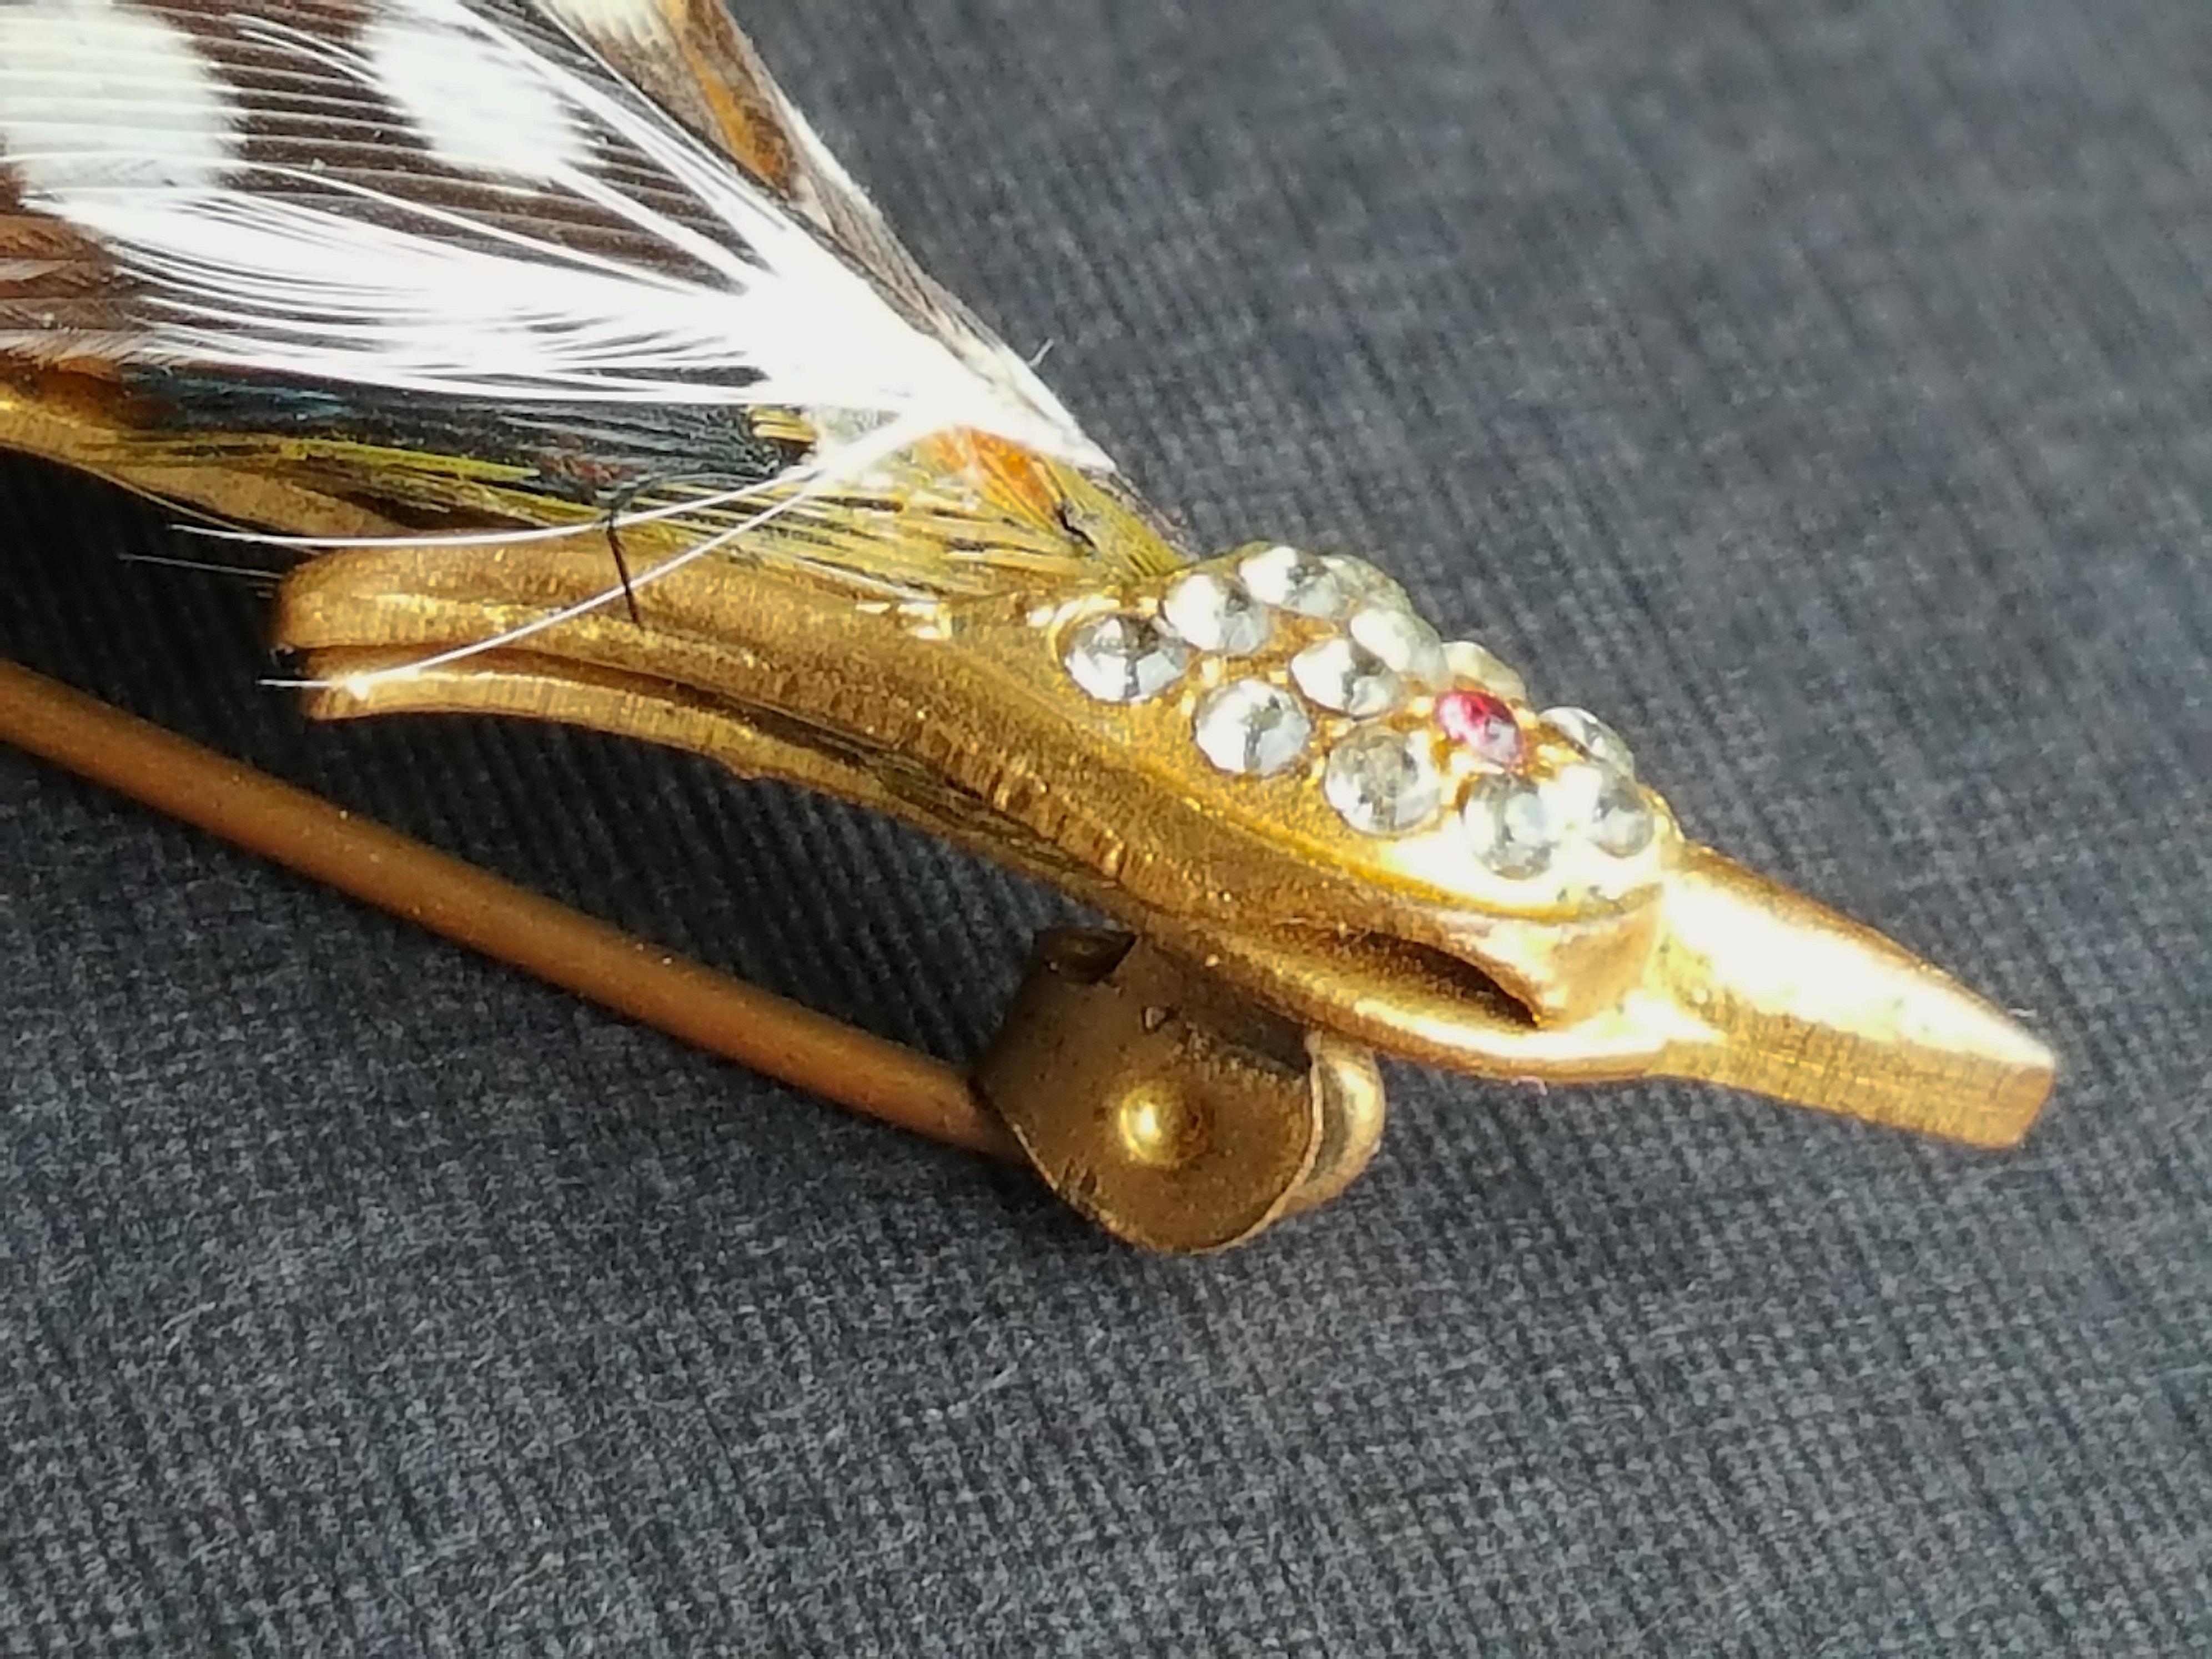 1938 ElsaSchiaparelli CouturePagan DeposeFrance FeatherCrystalGold Bird Brooch In Good Condition For Sale In Chicago, IL